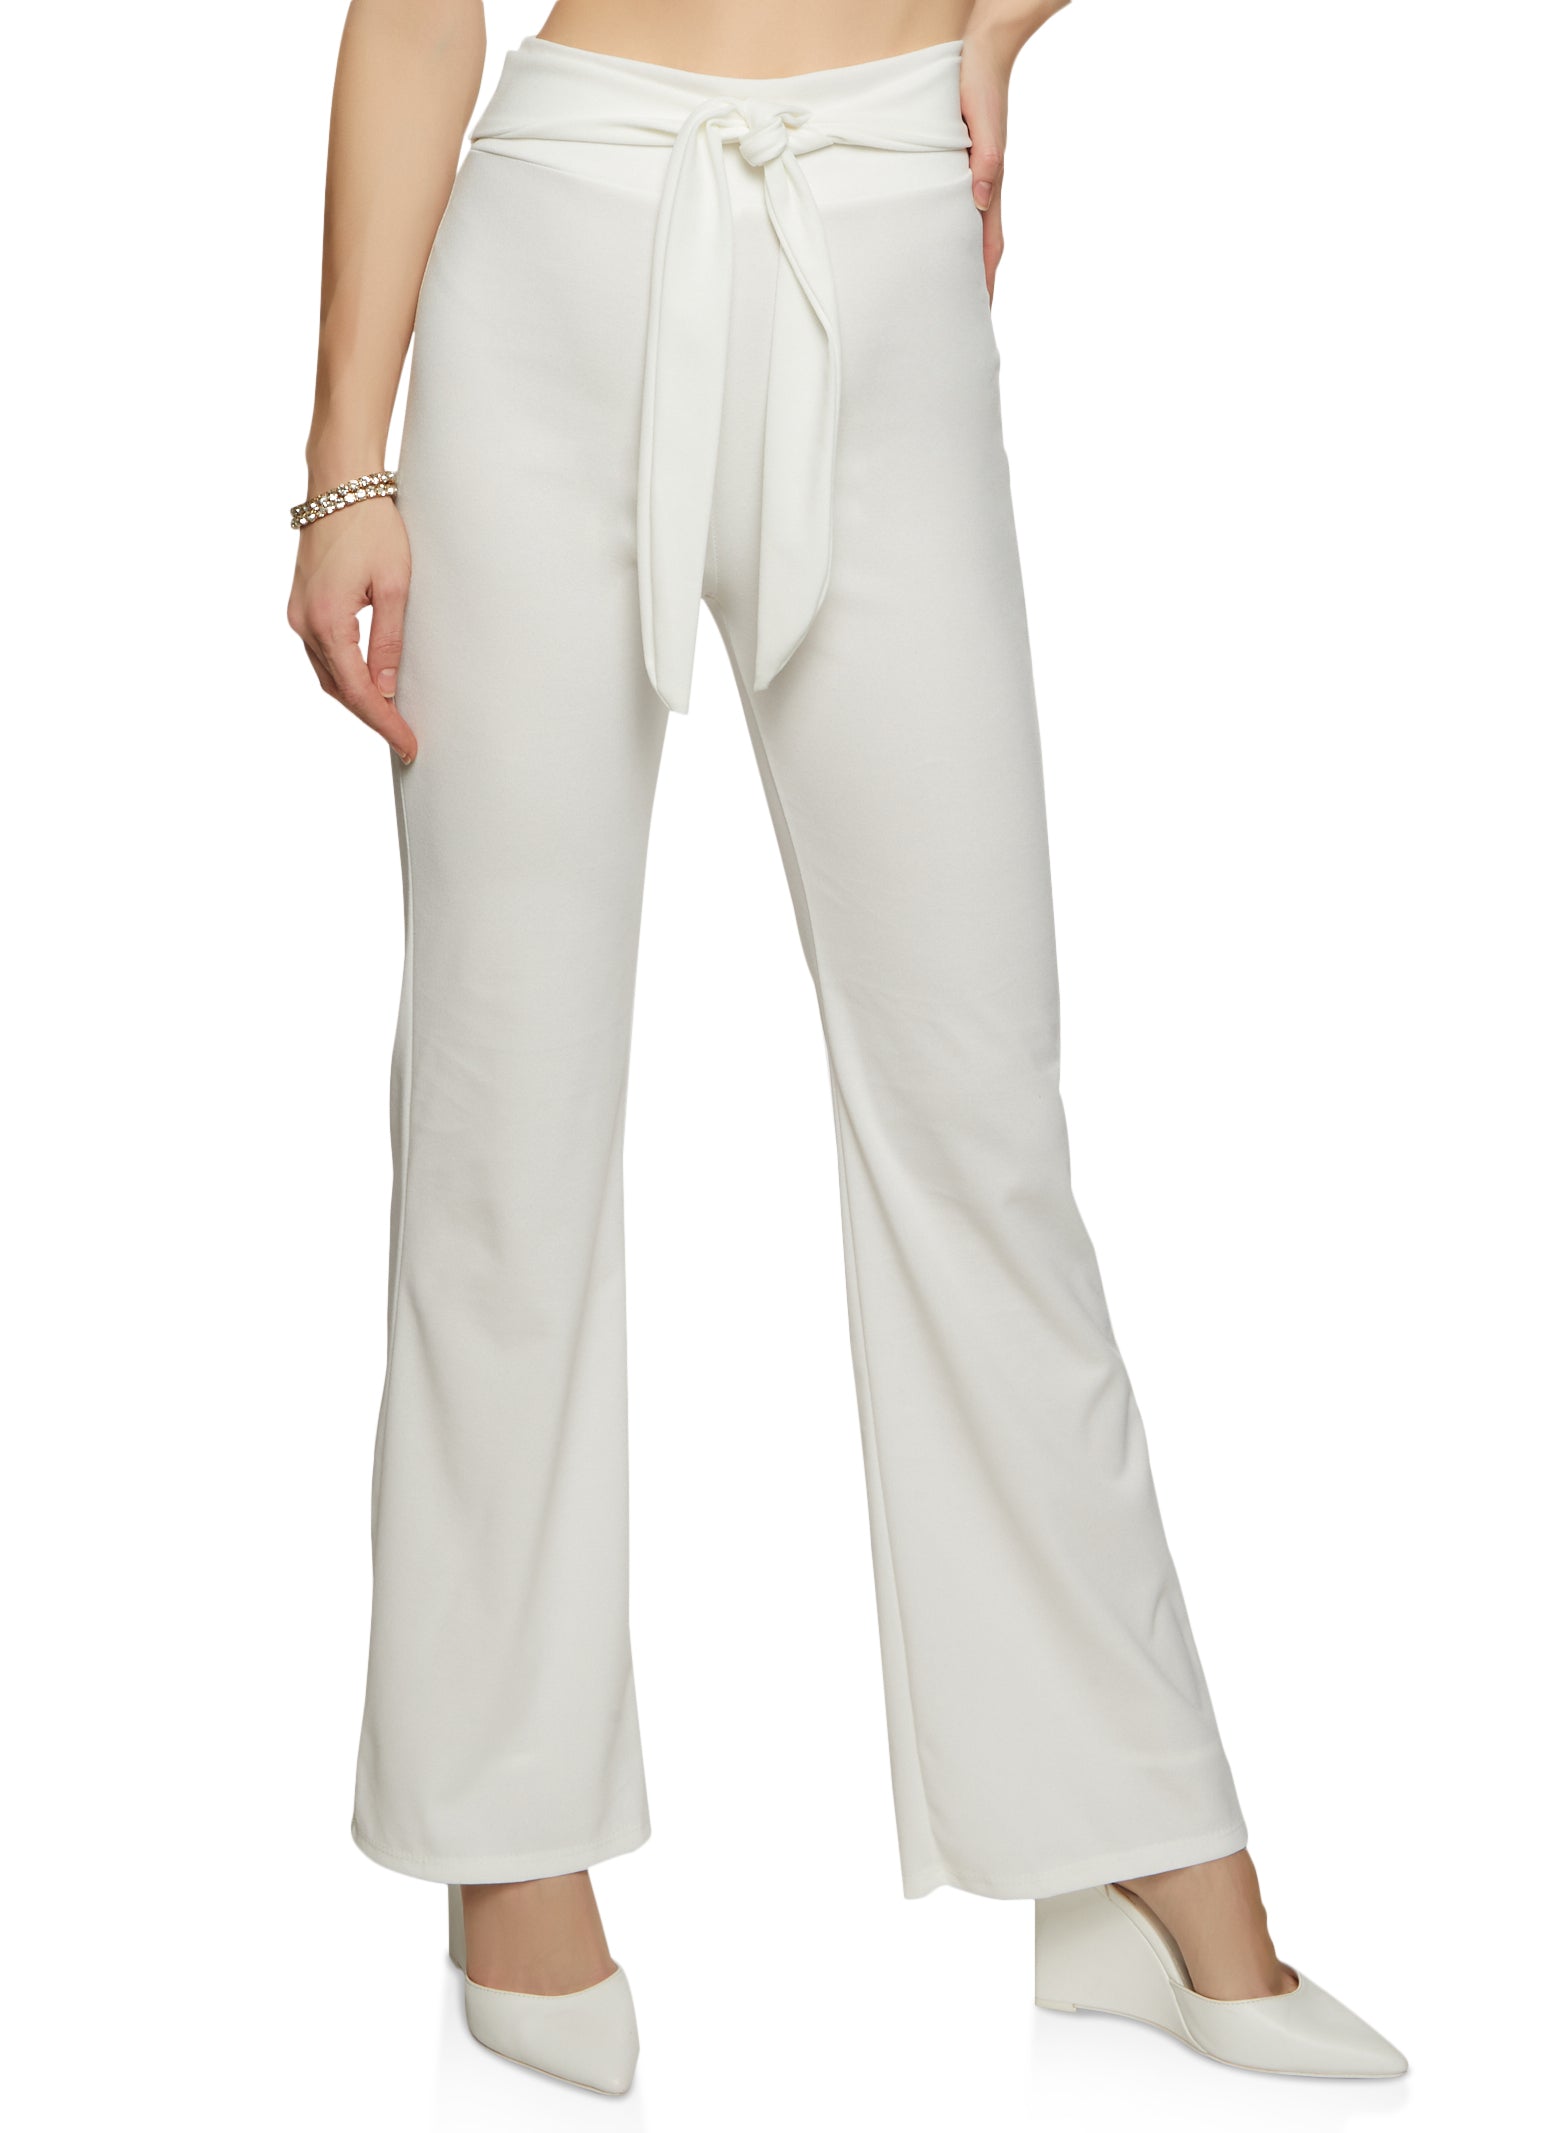 Plain Ladies Knot Pants at Rs 185/piece in Delhi | ID: 24824232730